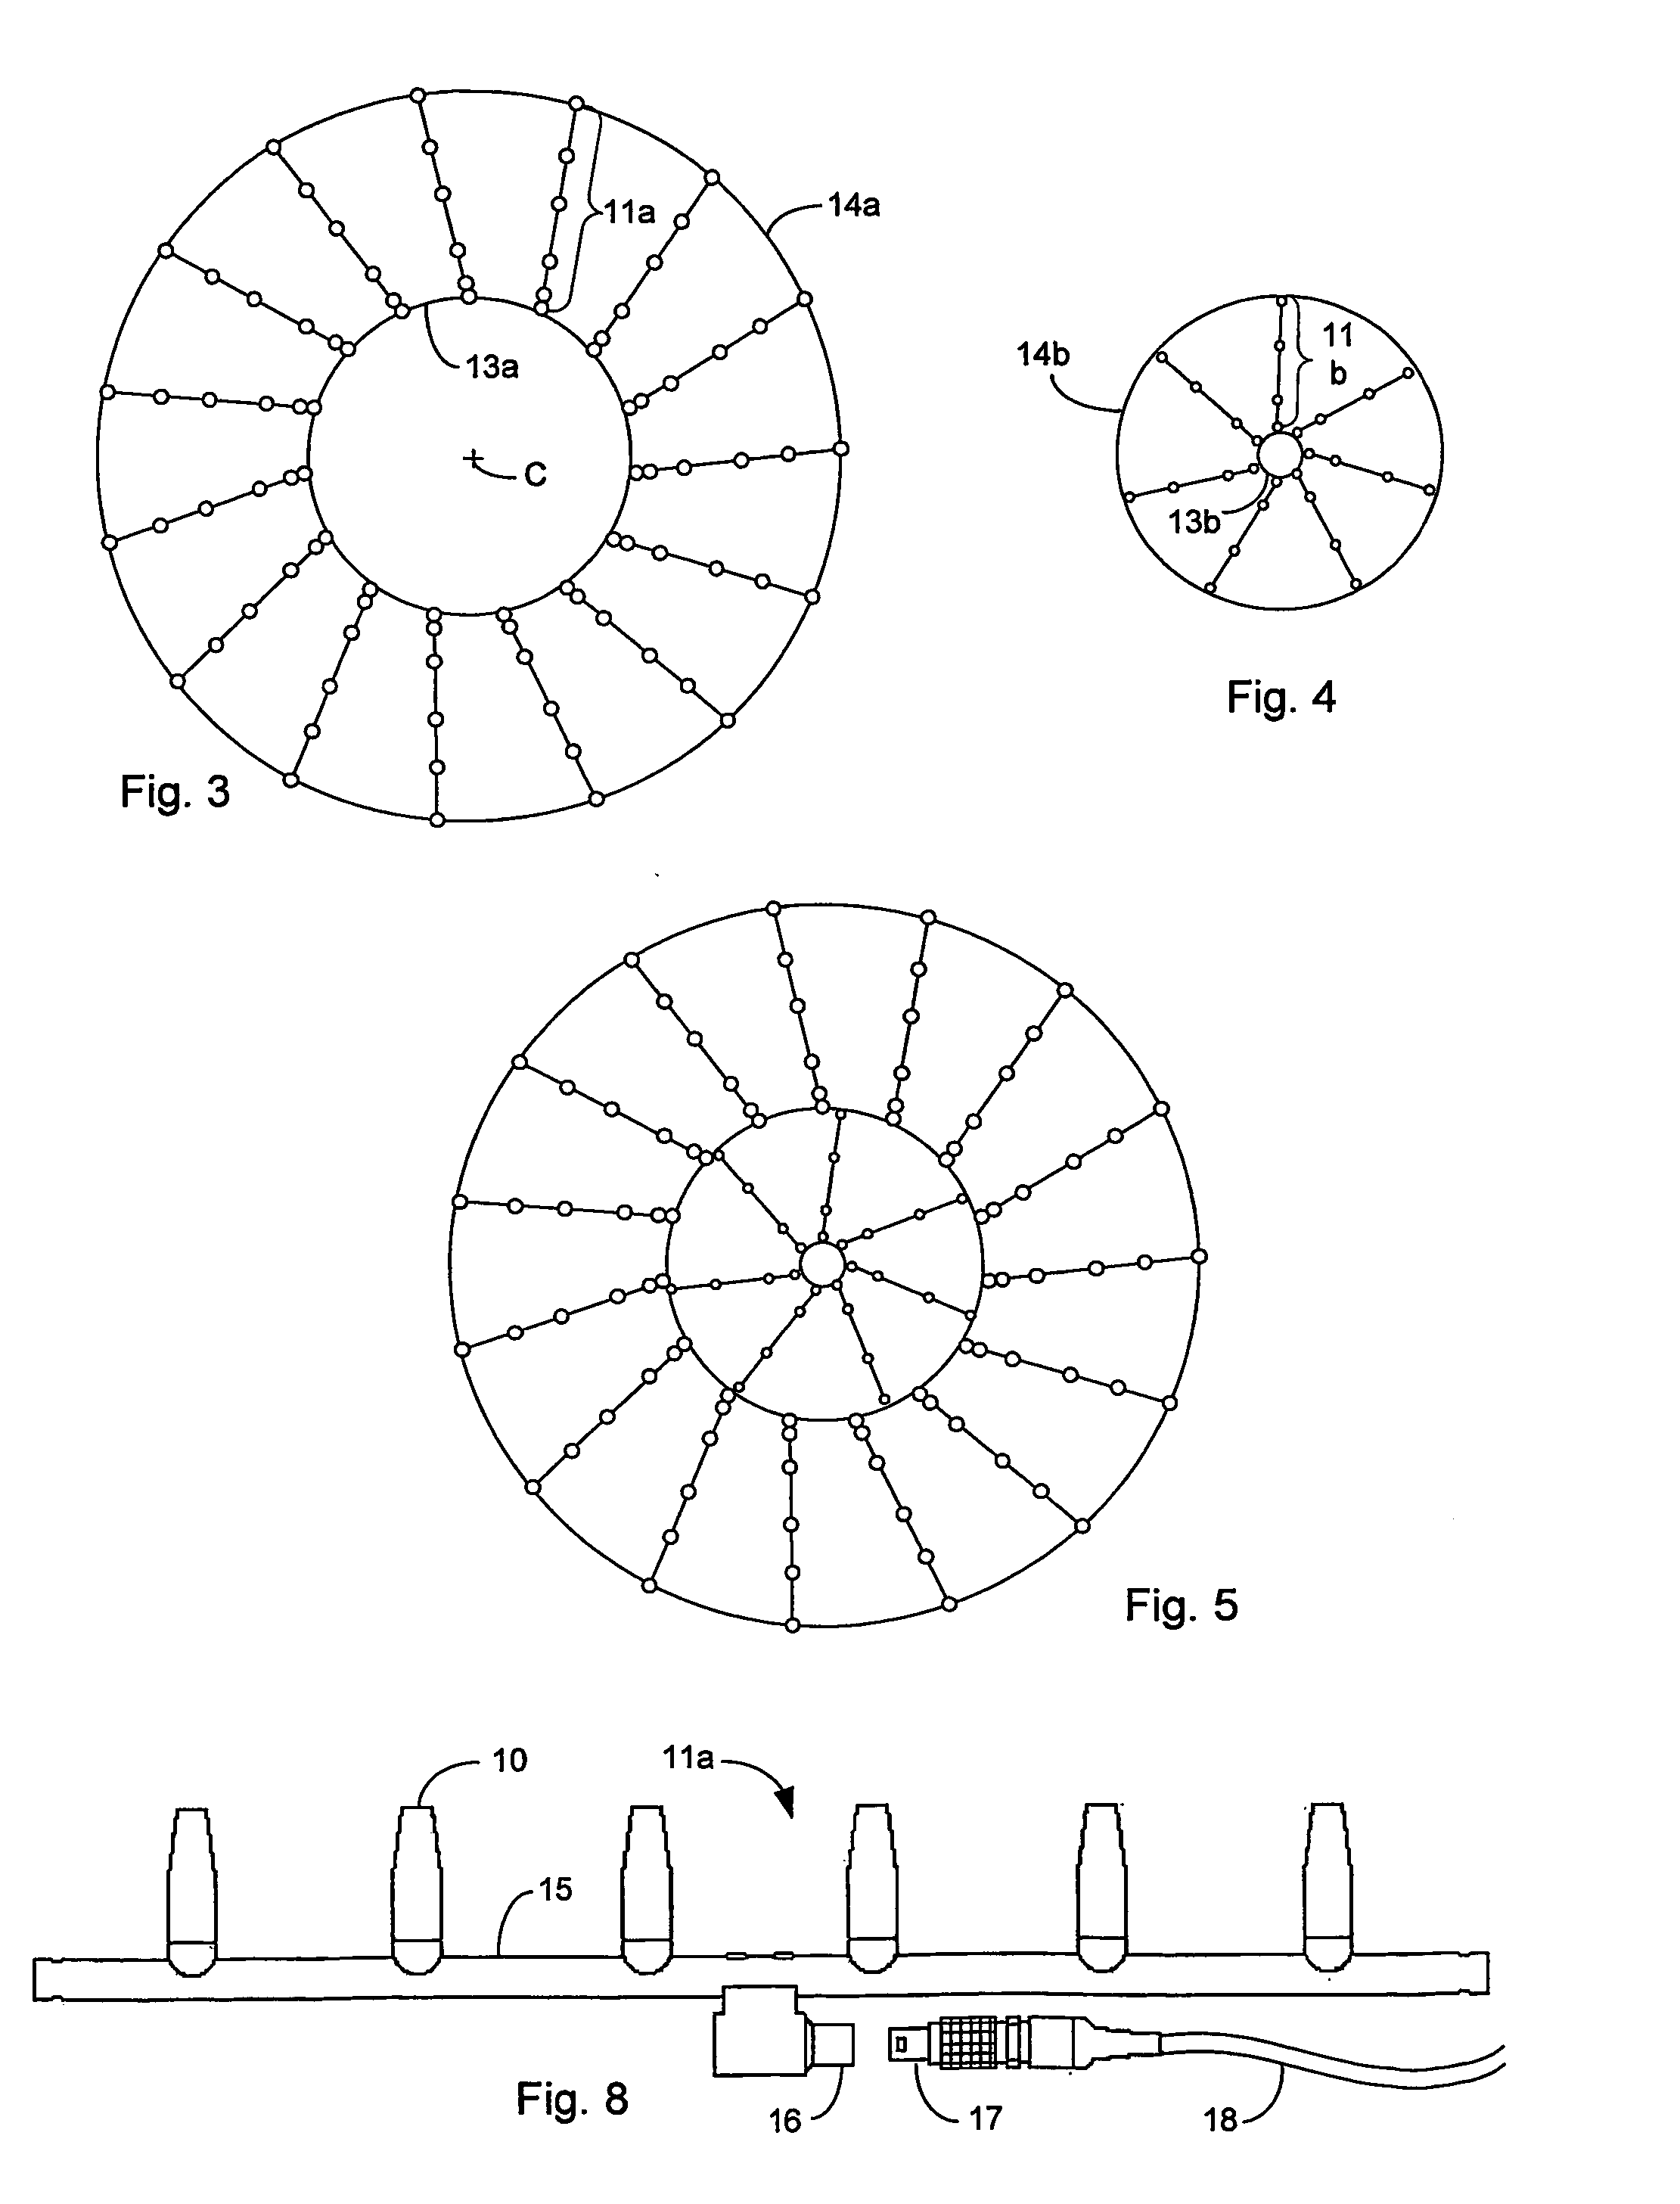 Beam forming array of transducers